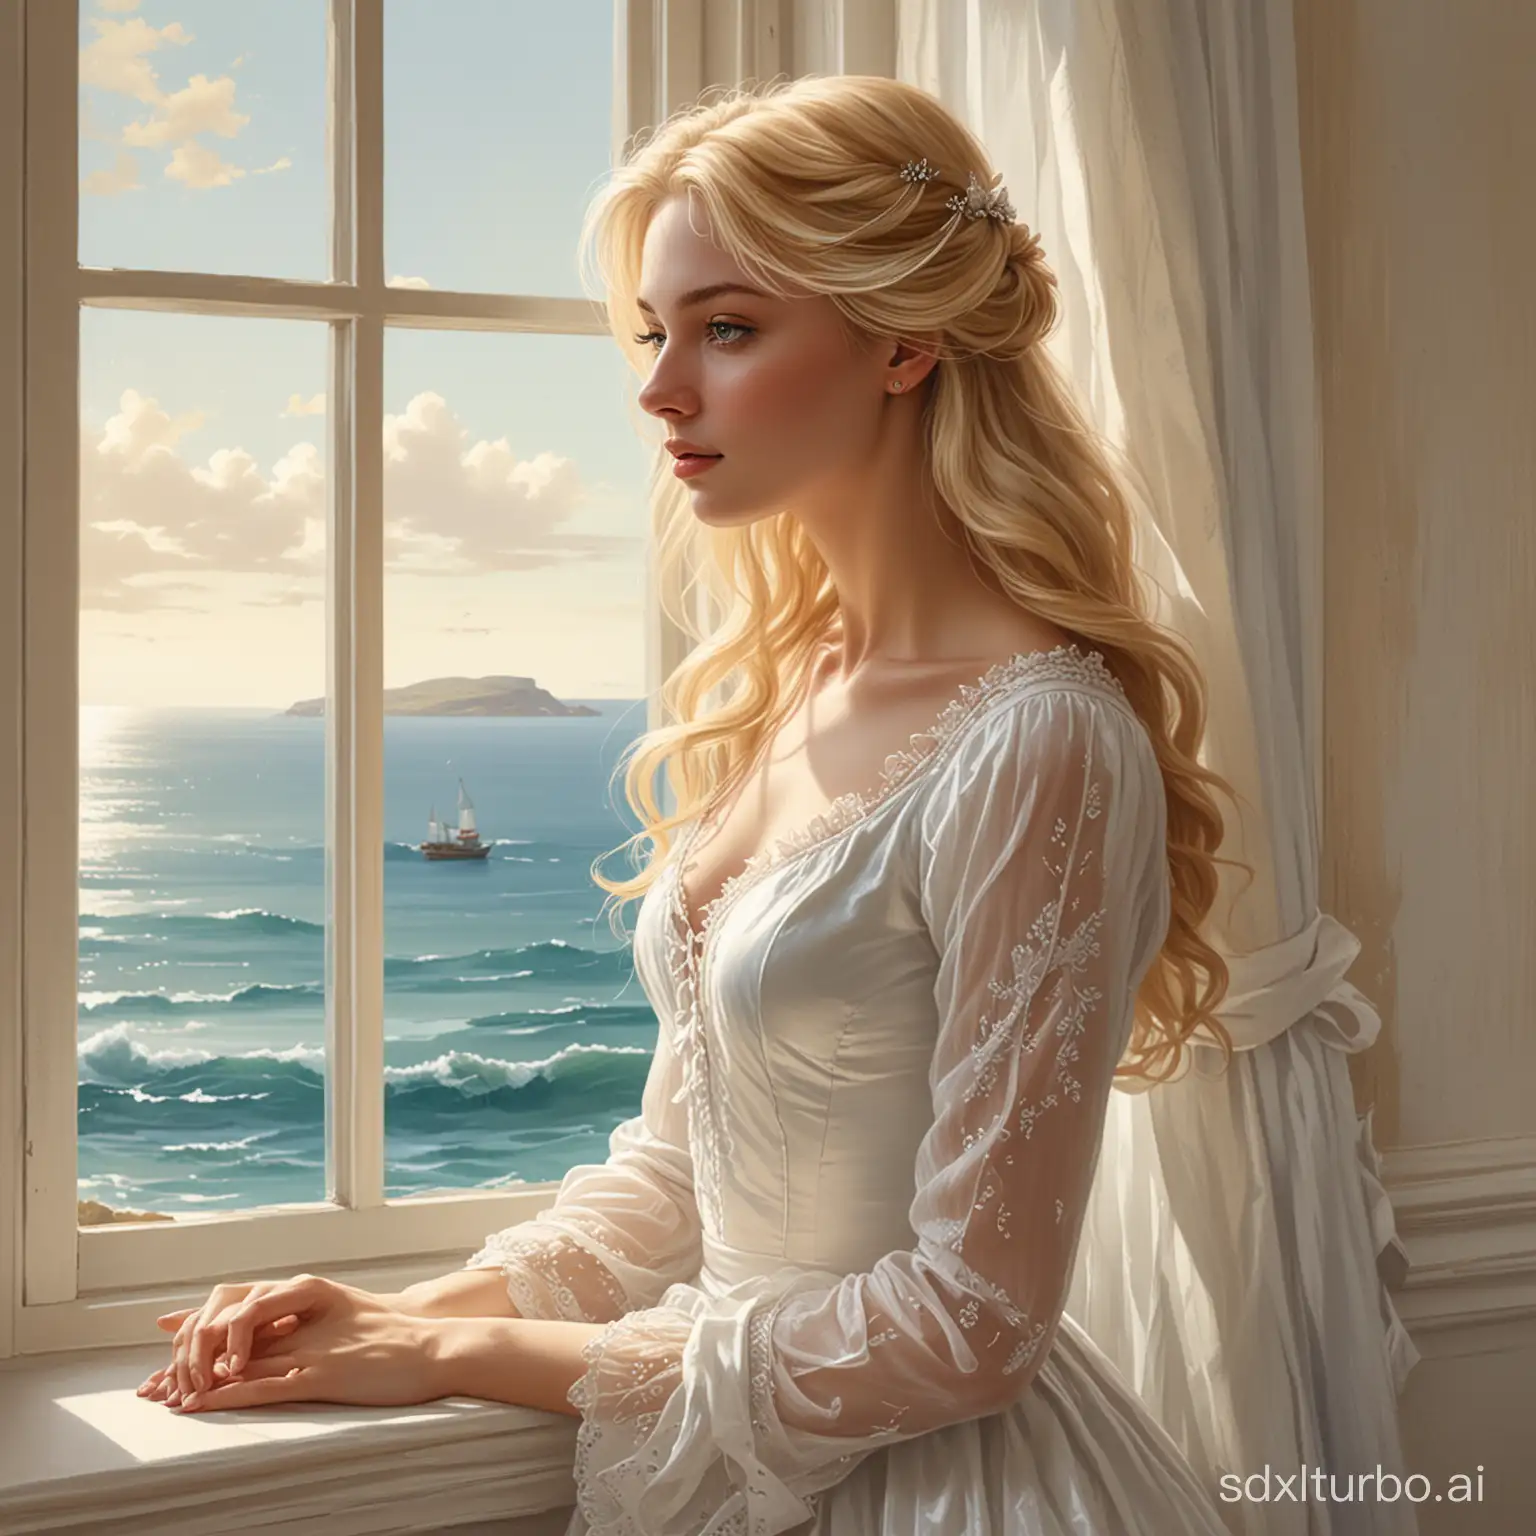 "ma, a painting of a beautiful blond woman perfect, in front of a window by the sea, beautiful illustration, a beautiful artwork illustration, storybook art, alice , fairy-tale illustration style, fairy tale illustrations, elegant study, exquisite digital illustration, fairy tale illustration, by artis in the art style of bowater, intricate beautiful painting, beautiful digital illustration, white dress"